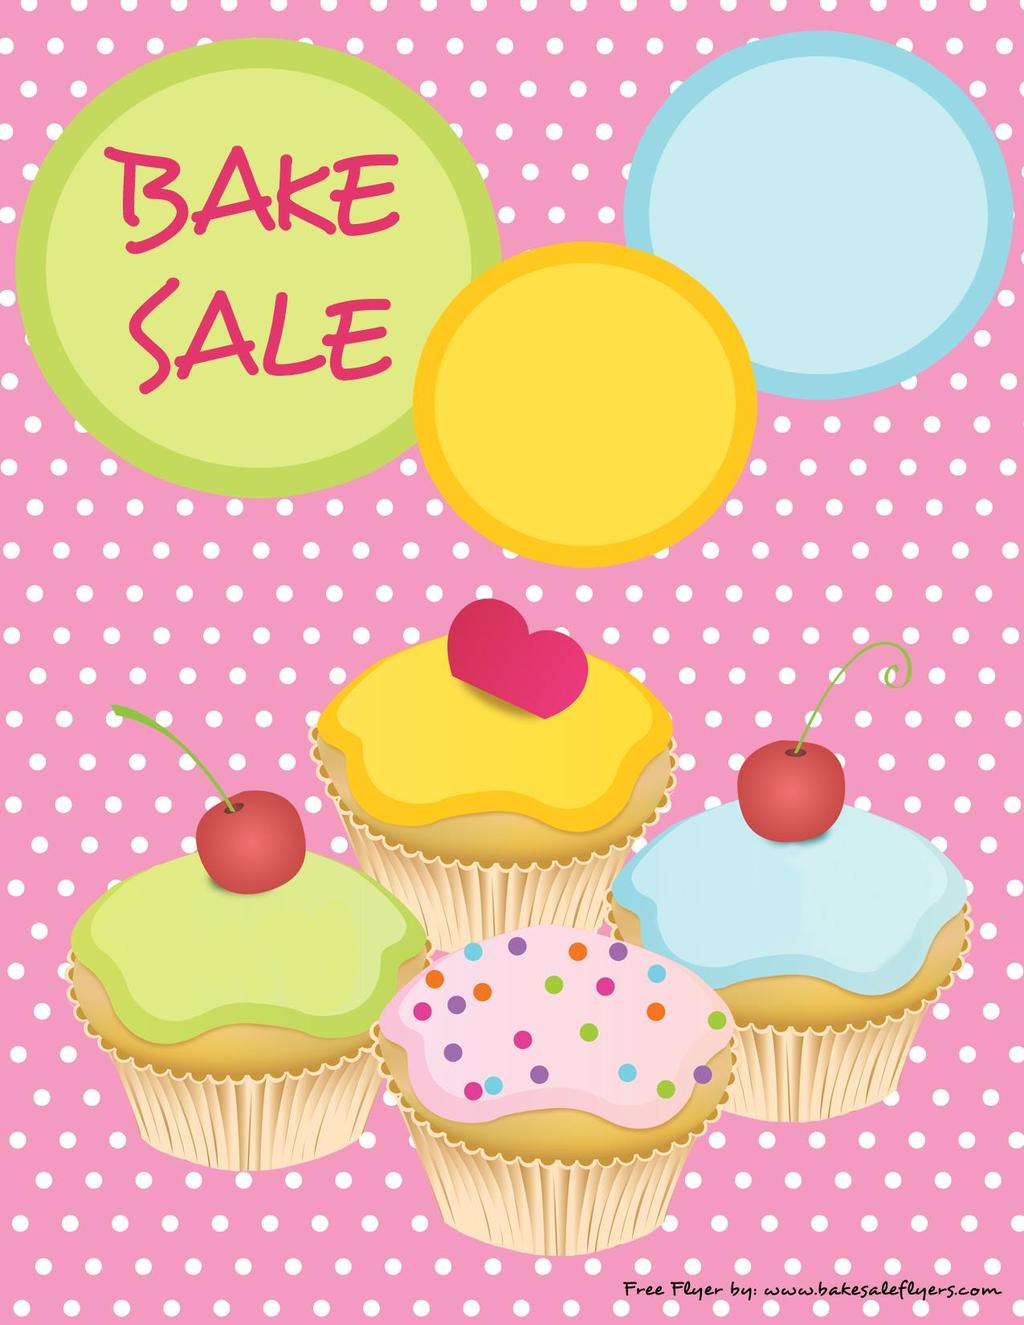 Sponsored by: Ladies Altar Society Benefits: Muscular Dystrophy Association August 25&26 After all masses Please bring a cake, buy a cake, or make a donation. Bake or buy, please!